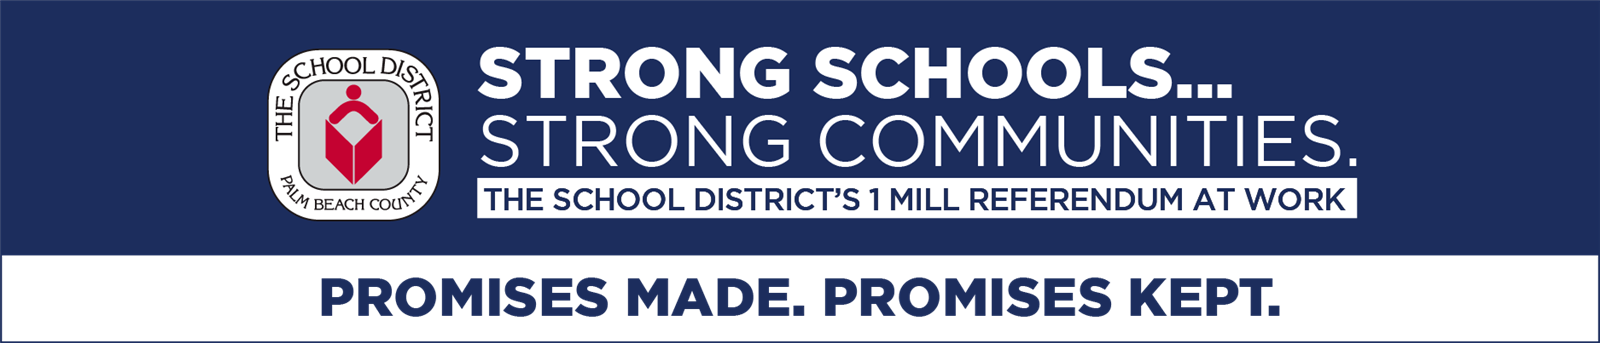 Strong Schools. Strong Communities. The School District's 1 mill referendum at work. Promises made. Promises kept.